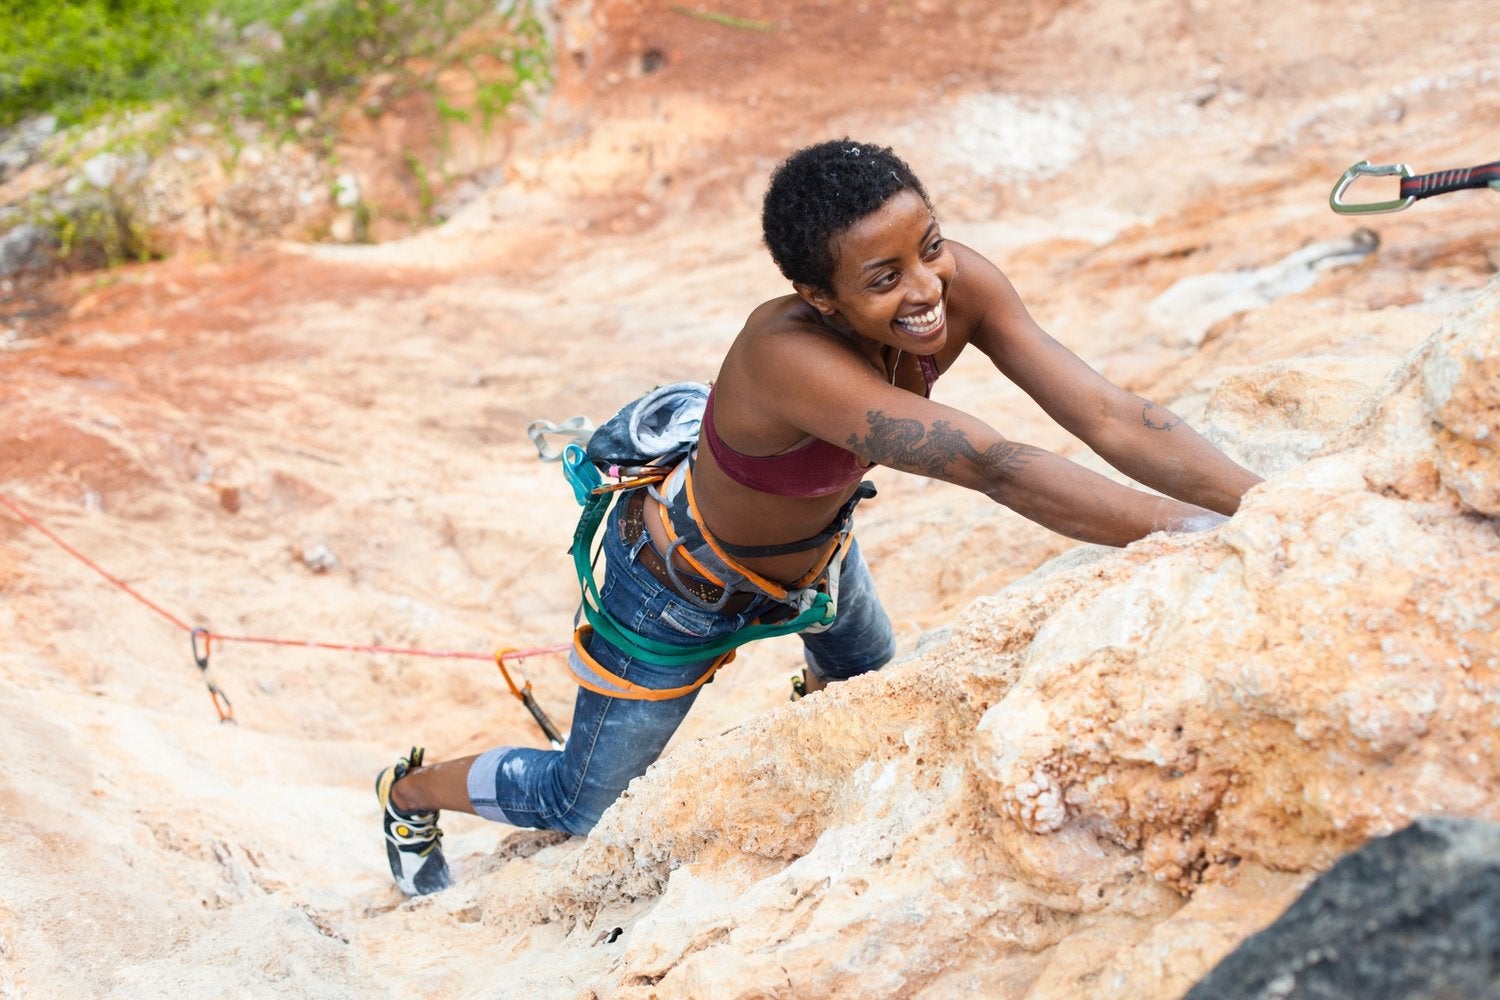 Meet The First Black Woman In The US To Own An Indoor Rock Climbing Gym